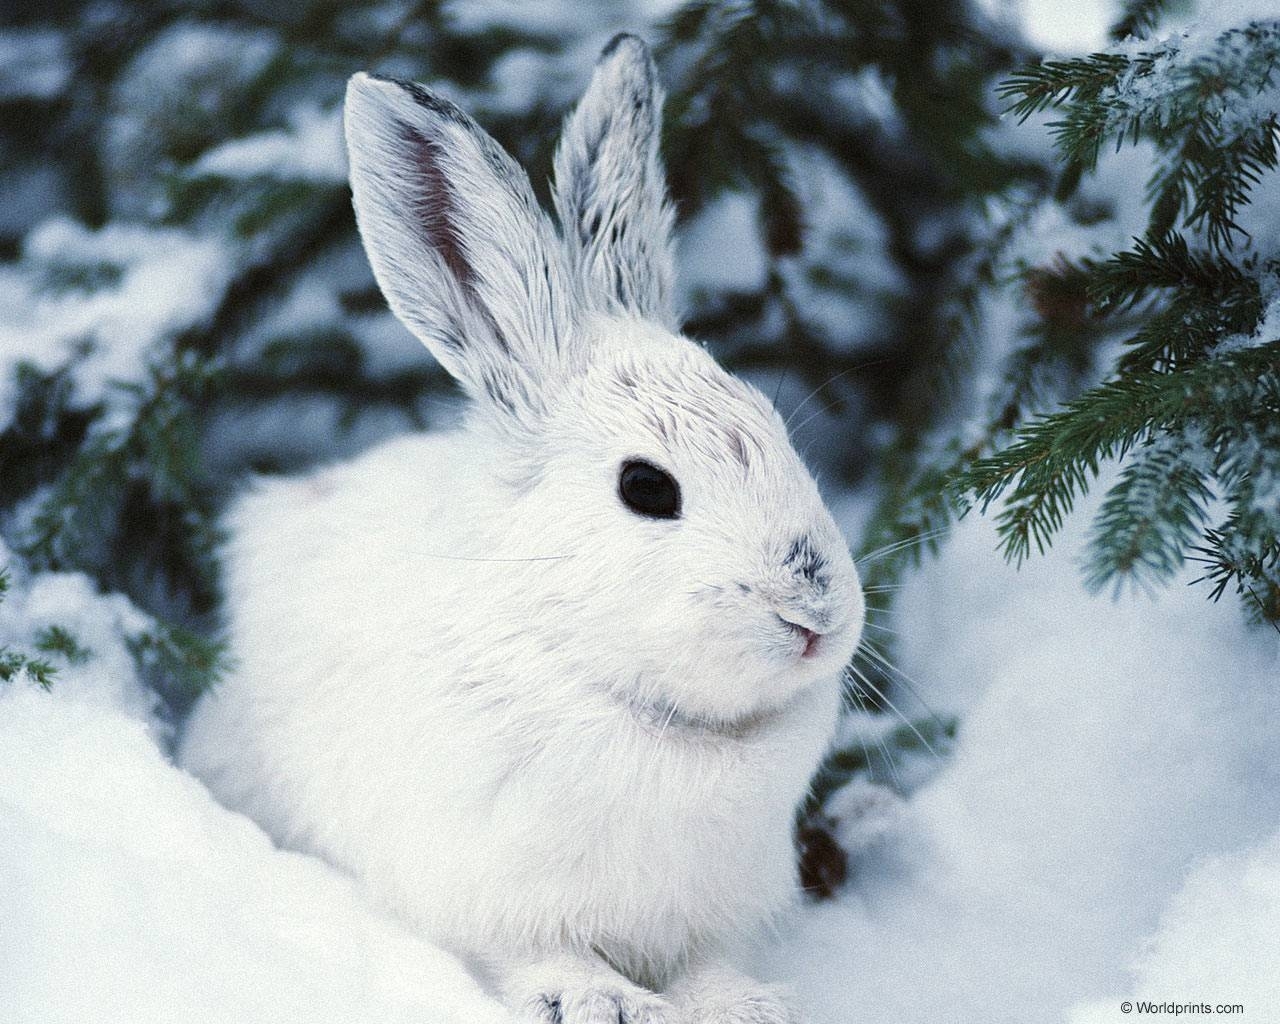 Mobile wallpaper: Rabbits, Animals, Winter, 114 download the picture for free